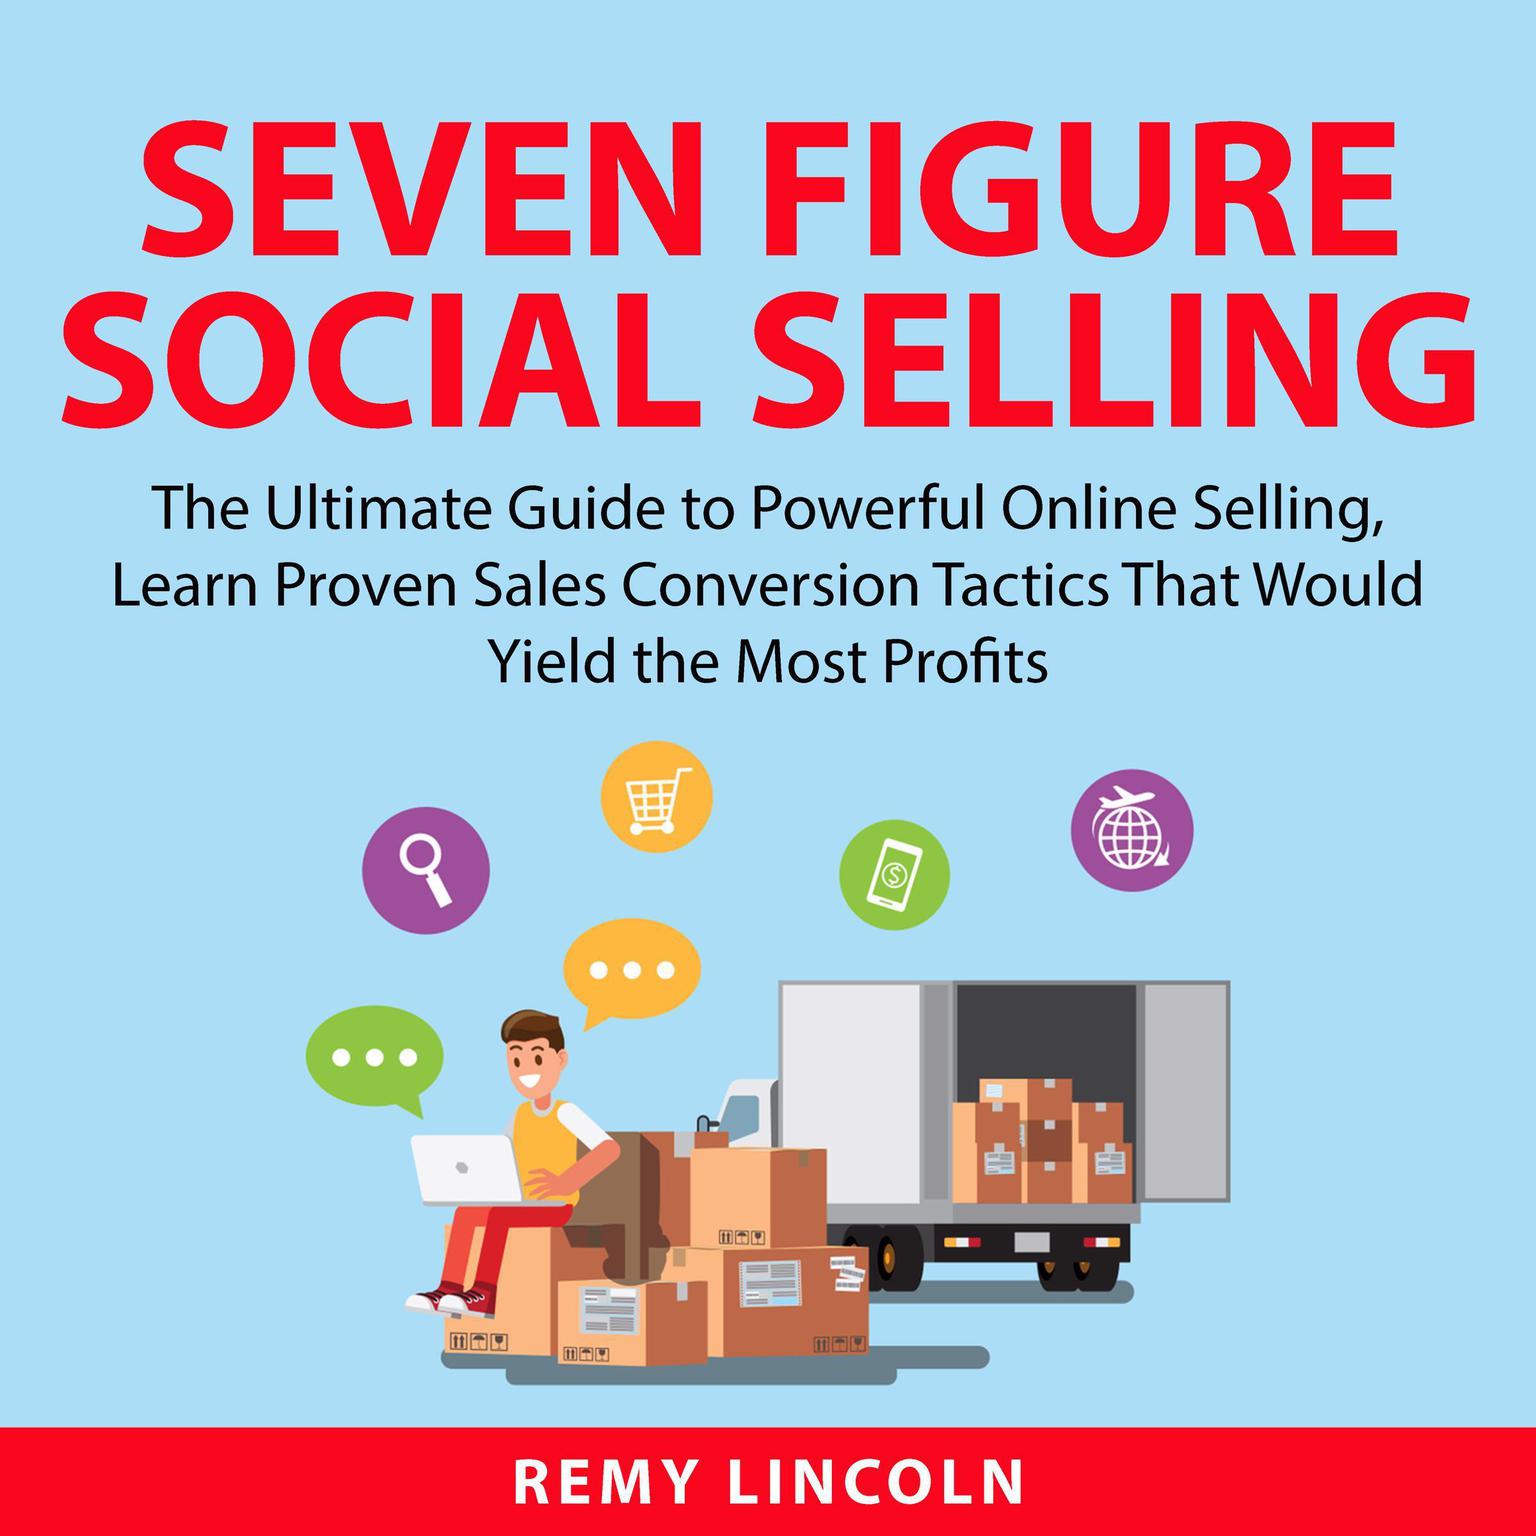 Seven Figure Social Selling: The Ultimate Guide to Powerful Online Selling, Learn Proven Sales Conversion Tactics That Would Yield the Most Profits Audiobook, by Remy Lincoln